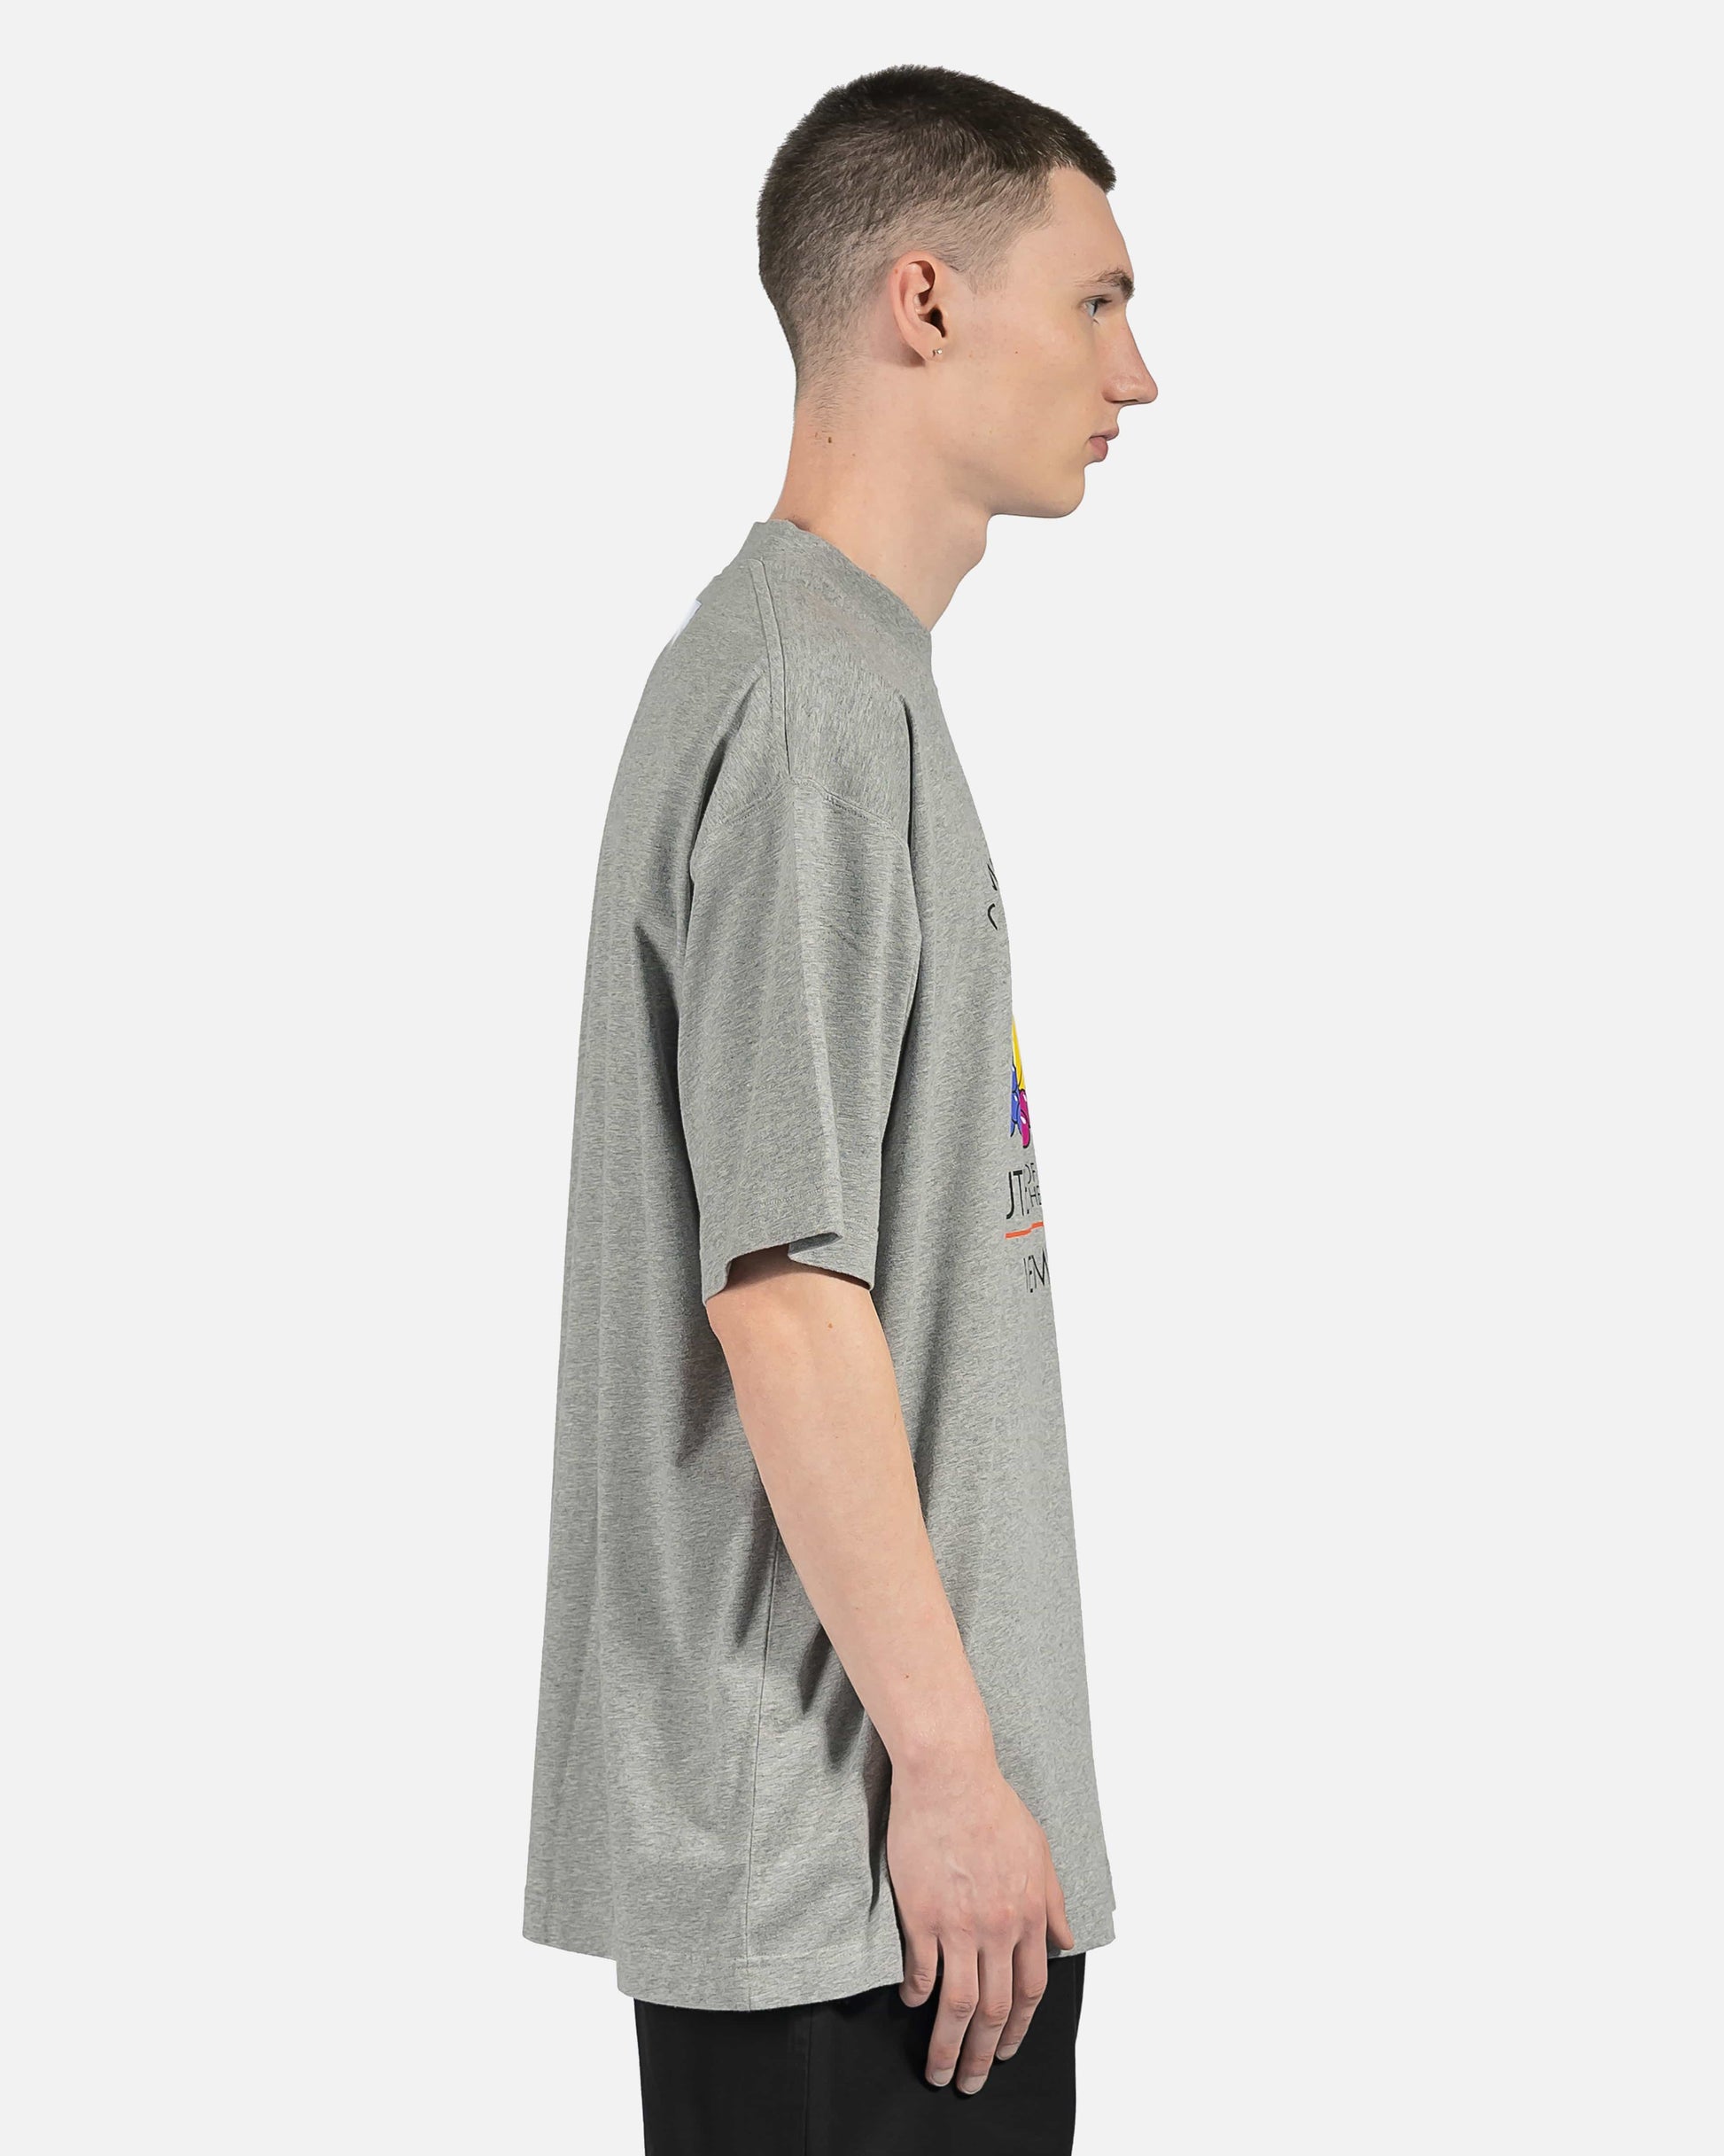 VETEMENTS Men's T-Shirts Cutest of the Fruits Logo Tee in Heather Grey